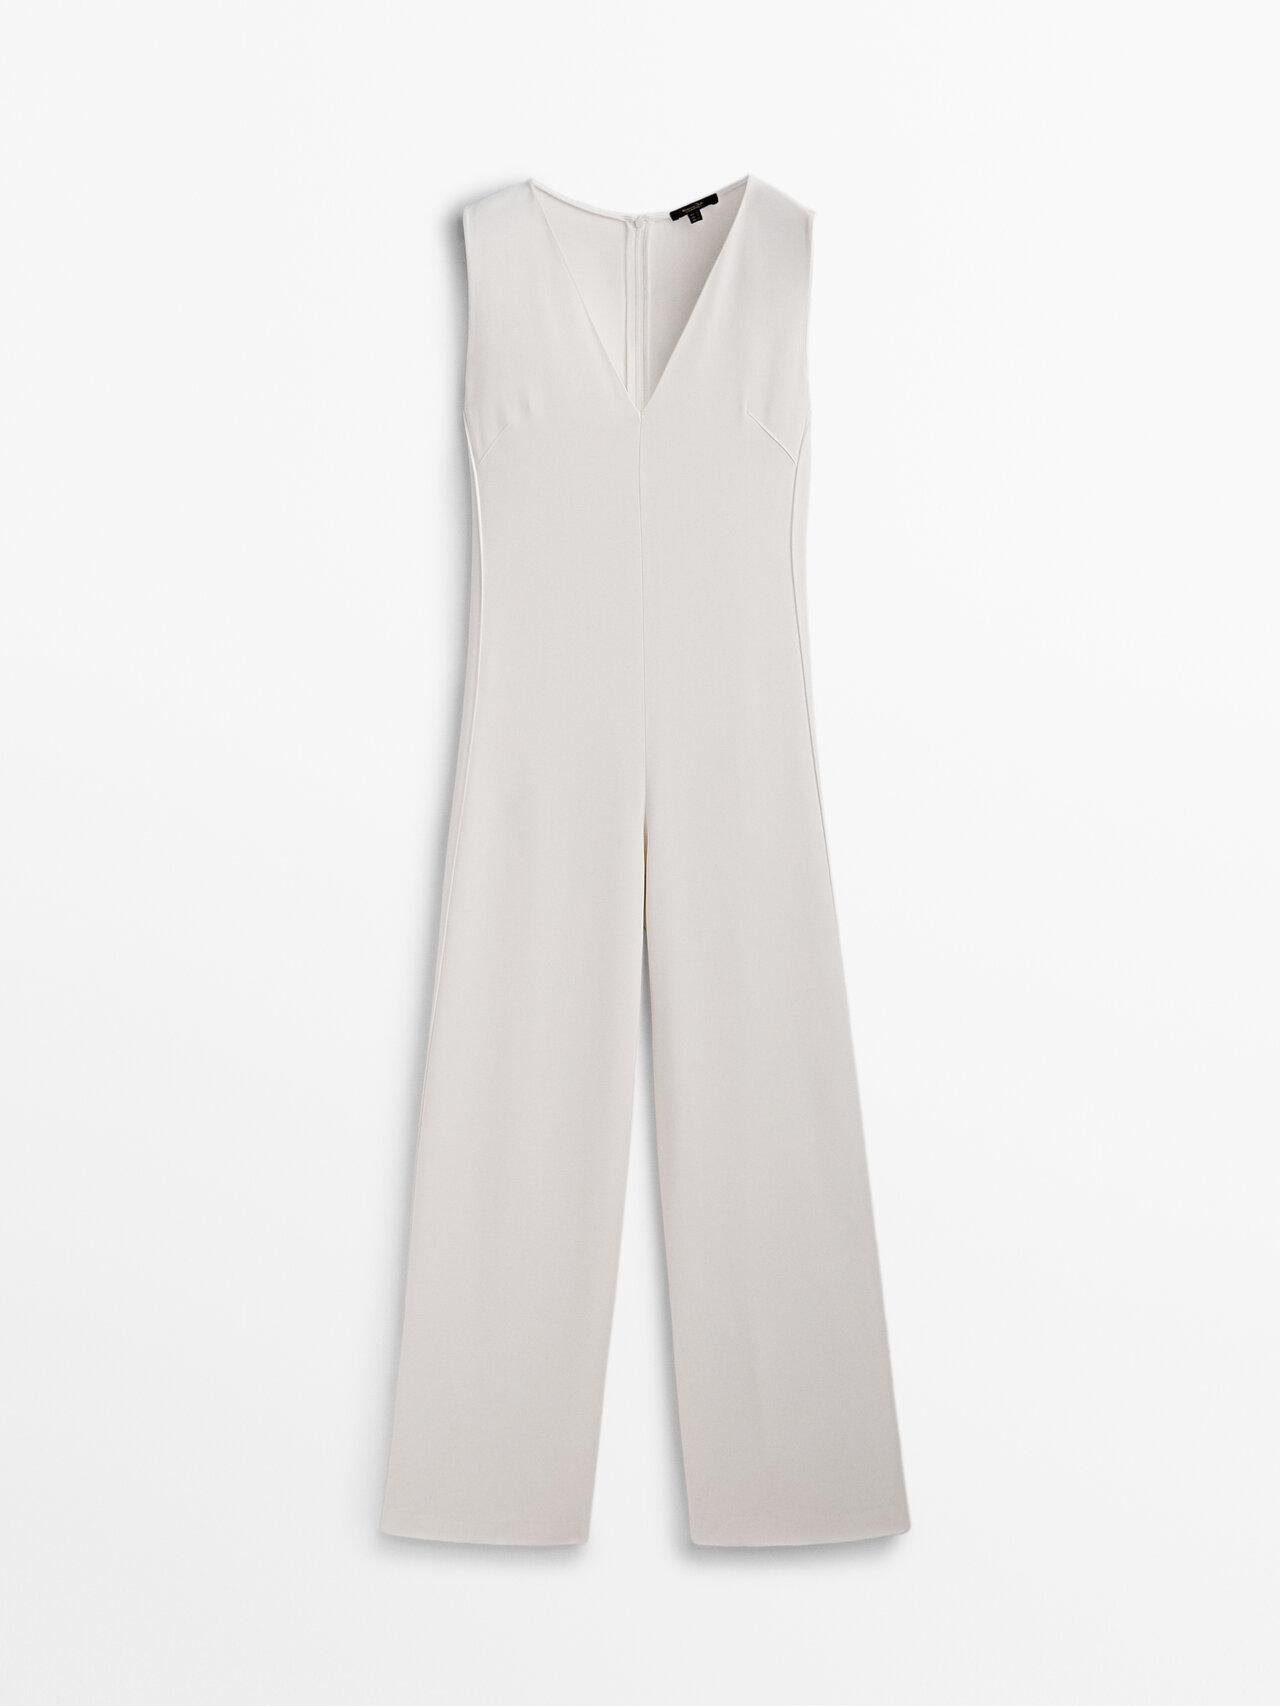 STRAPLESS JUMPSUIT WITH BOWS - Black | ZARA India